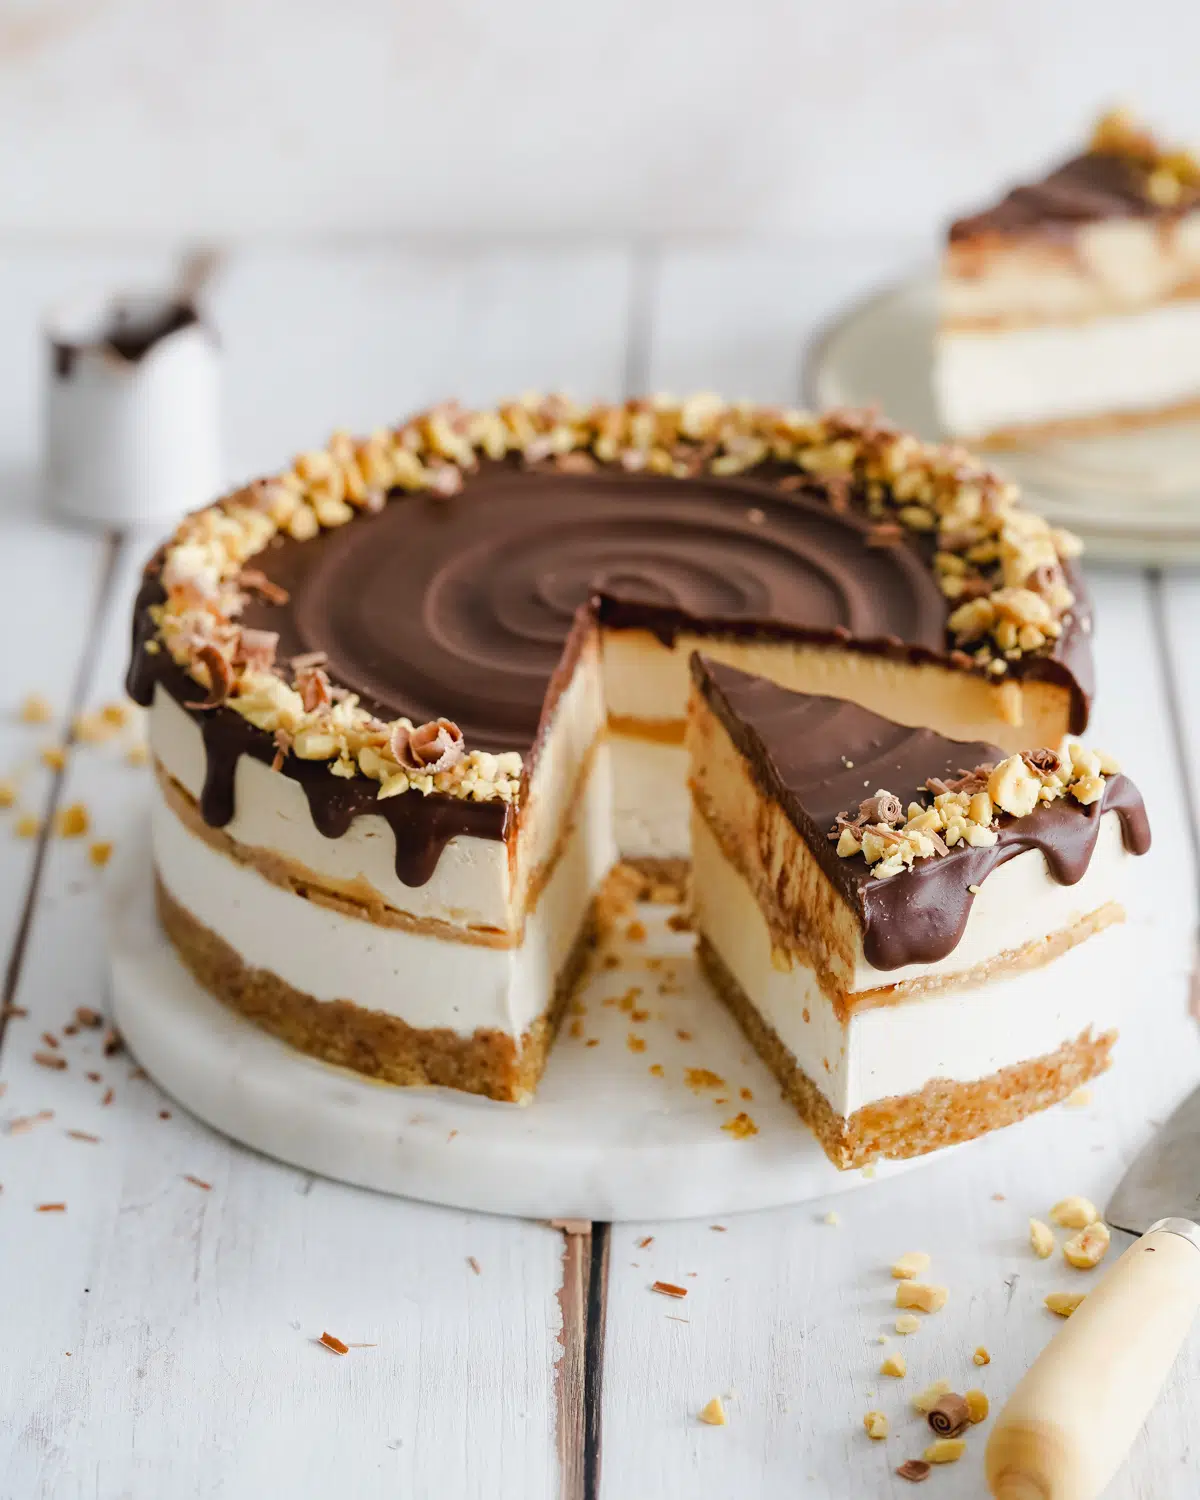 layered peanut butter chocolate cheesecake on white wooden cutting board.